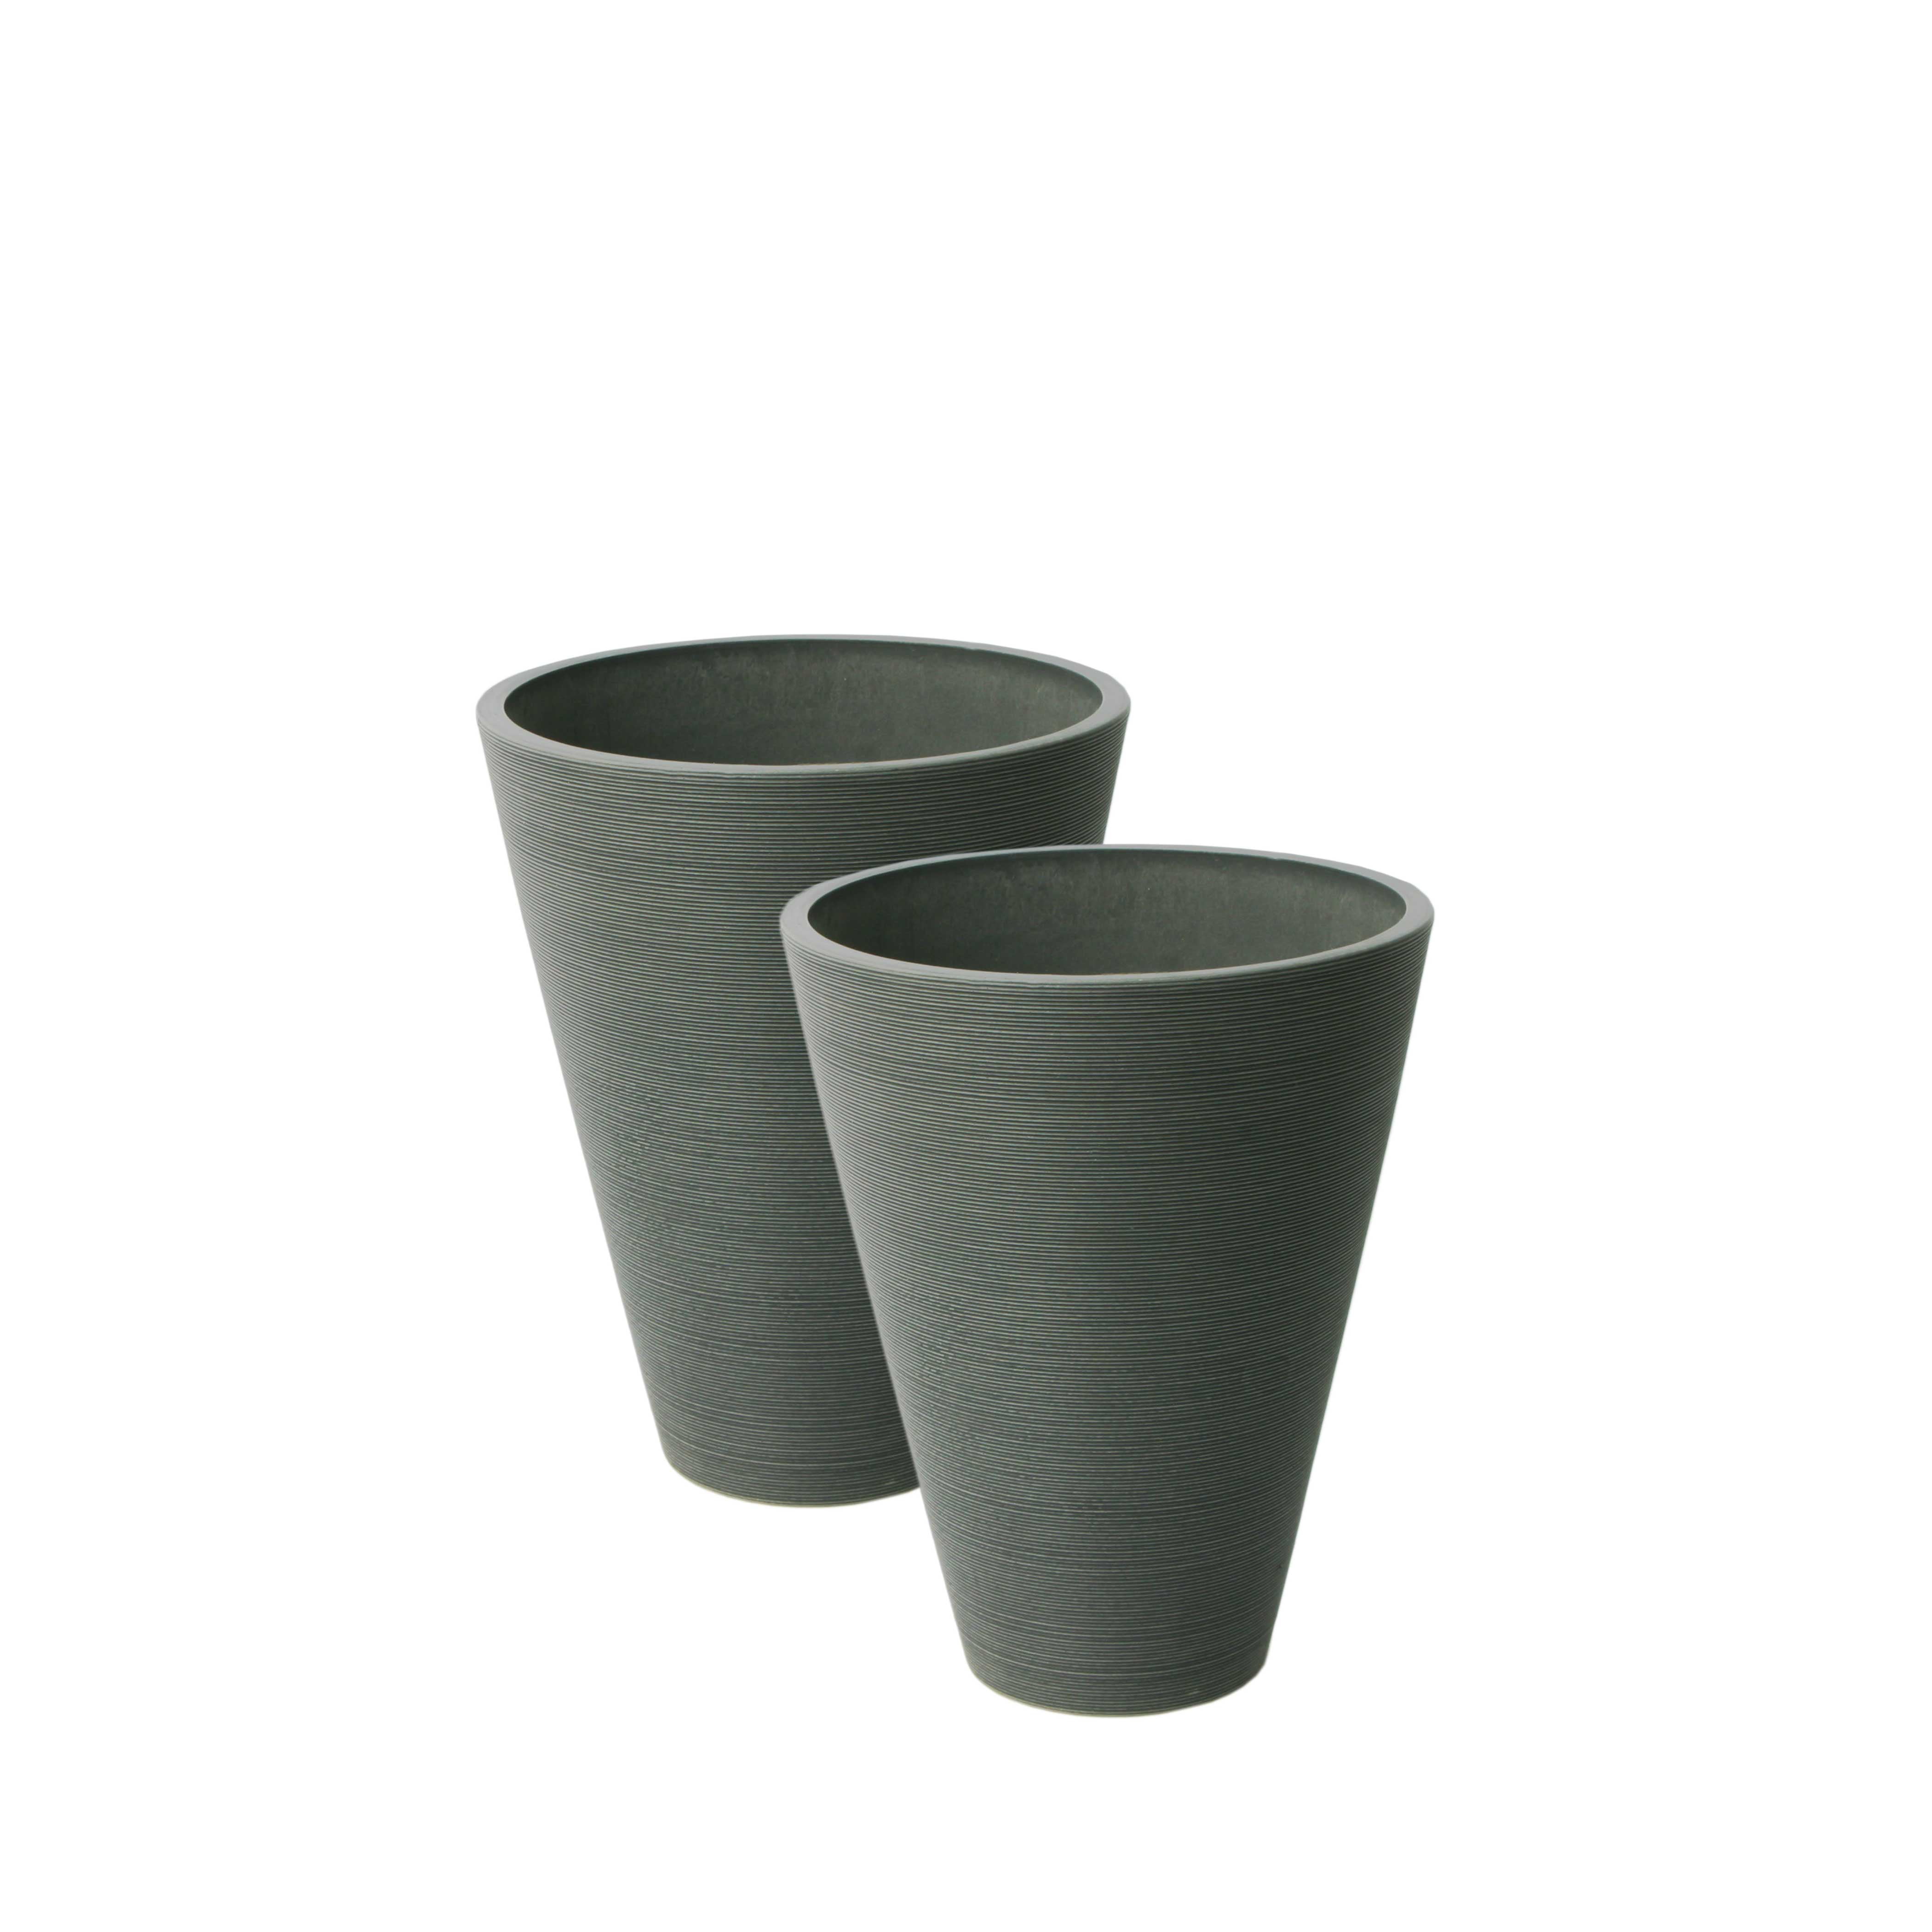 16228 Valencia 11.4 In. Dia. By 14 In. 2 Round Taper Ribbed Planters, Charcoal - Pack Of 2